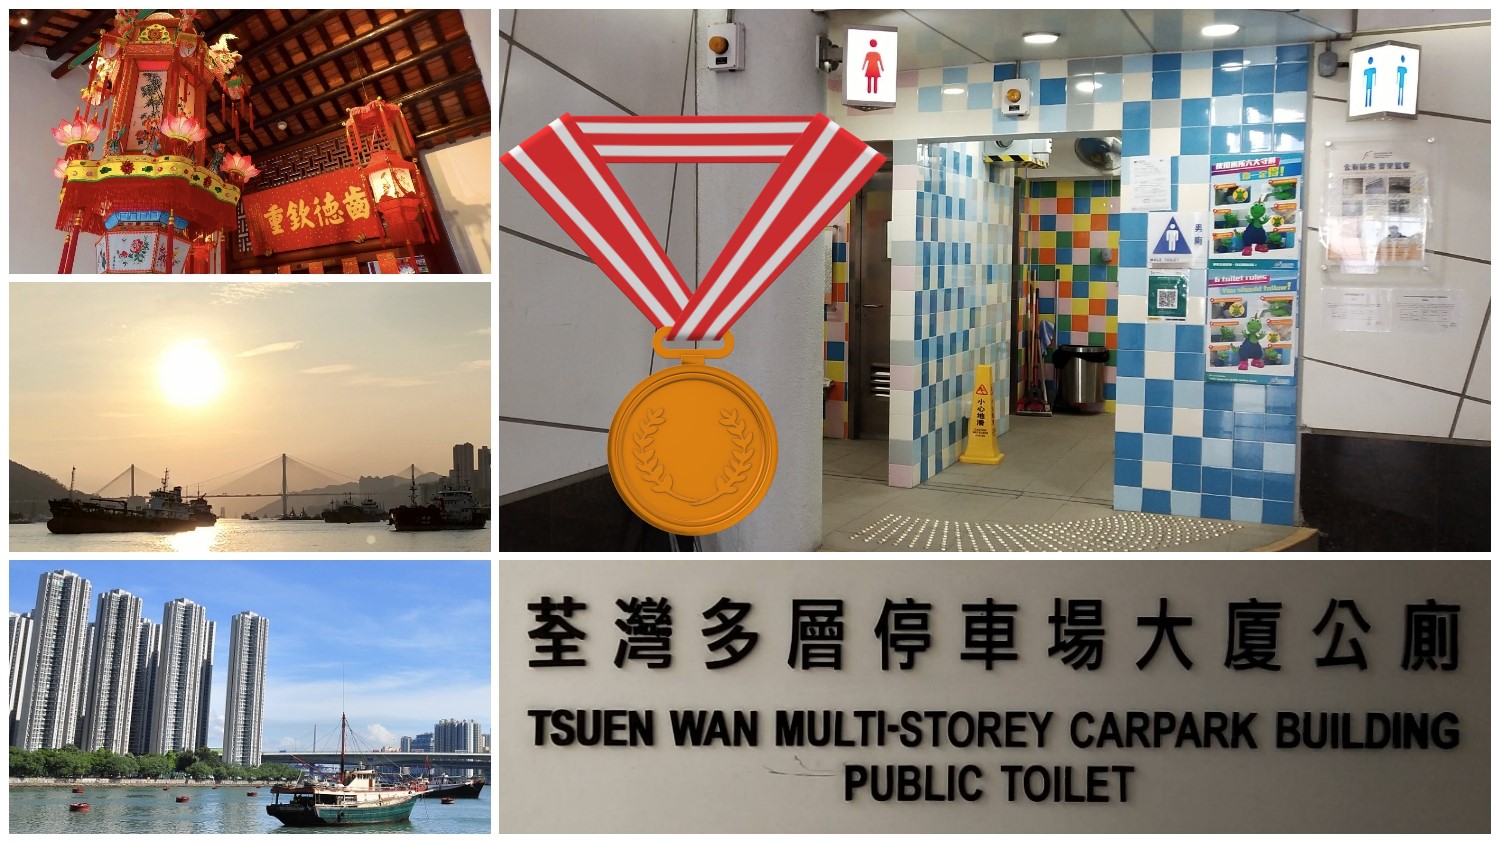 Attractions near the gold medalist of Hong Kong Best Public Toilet Award